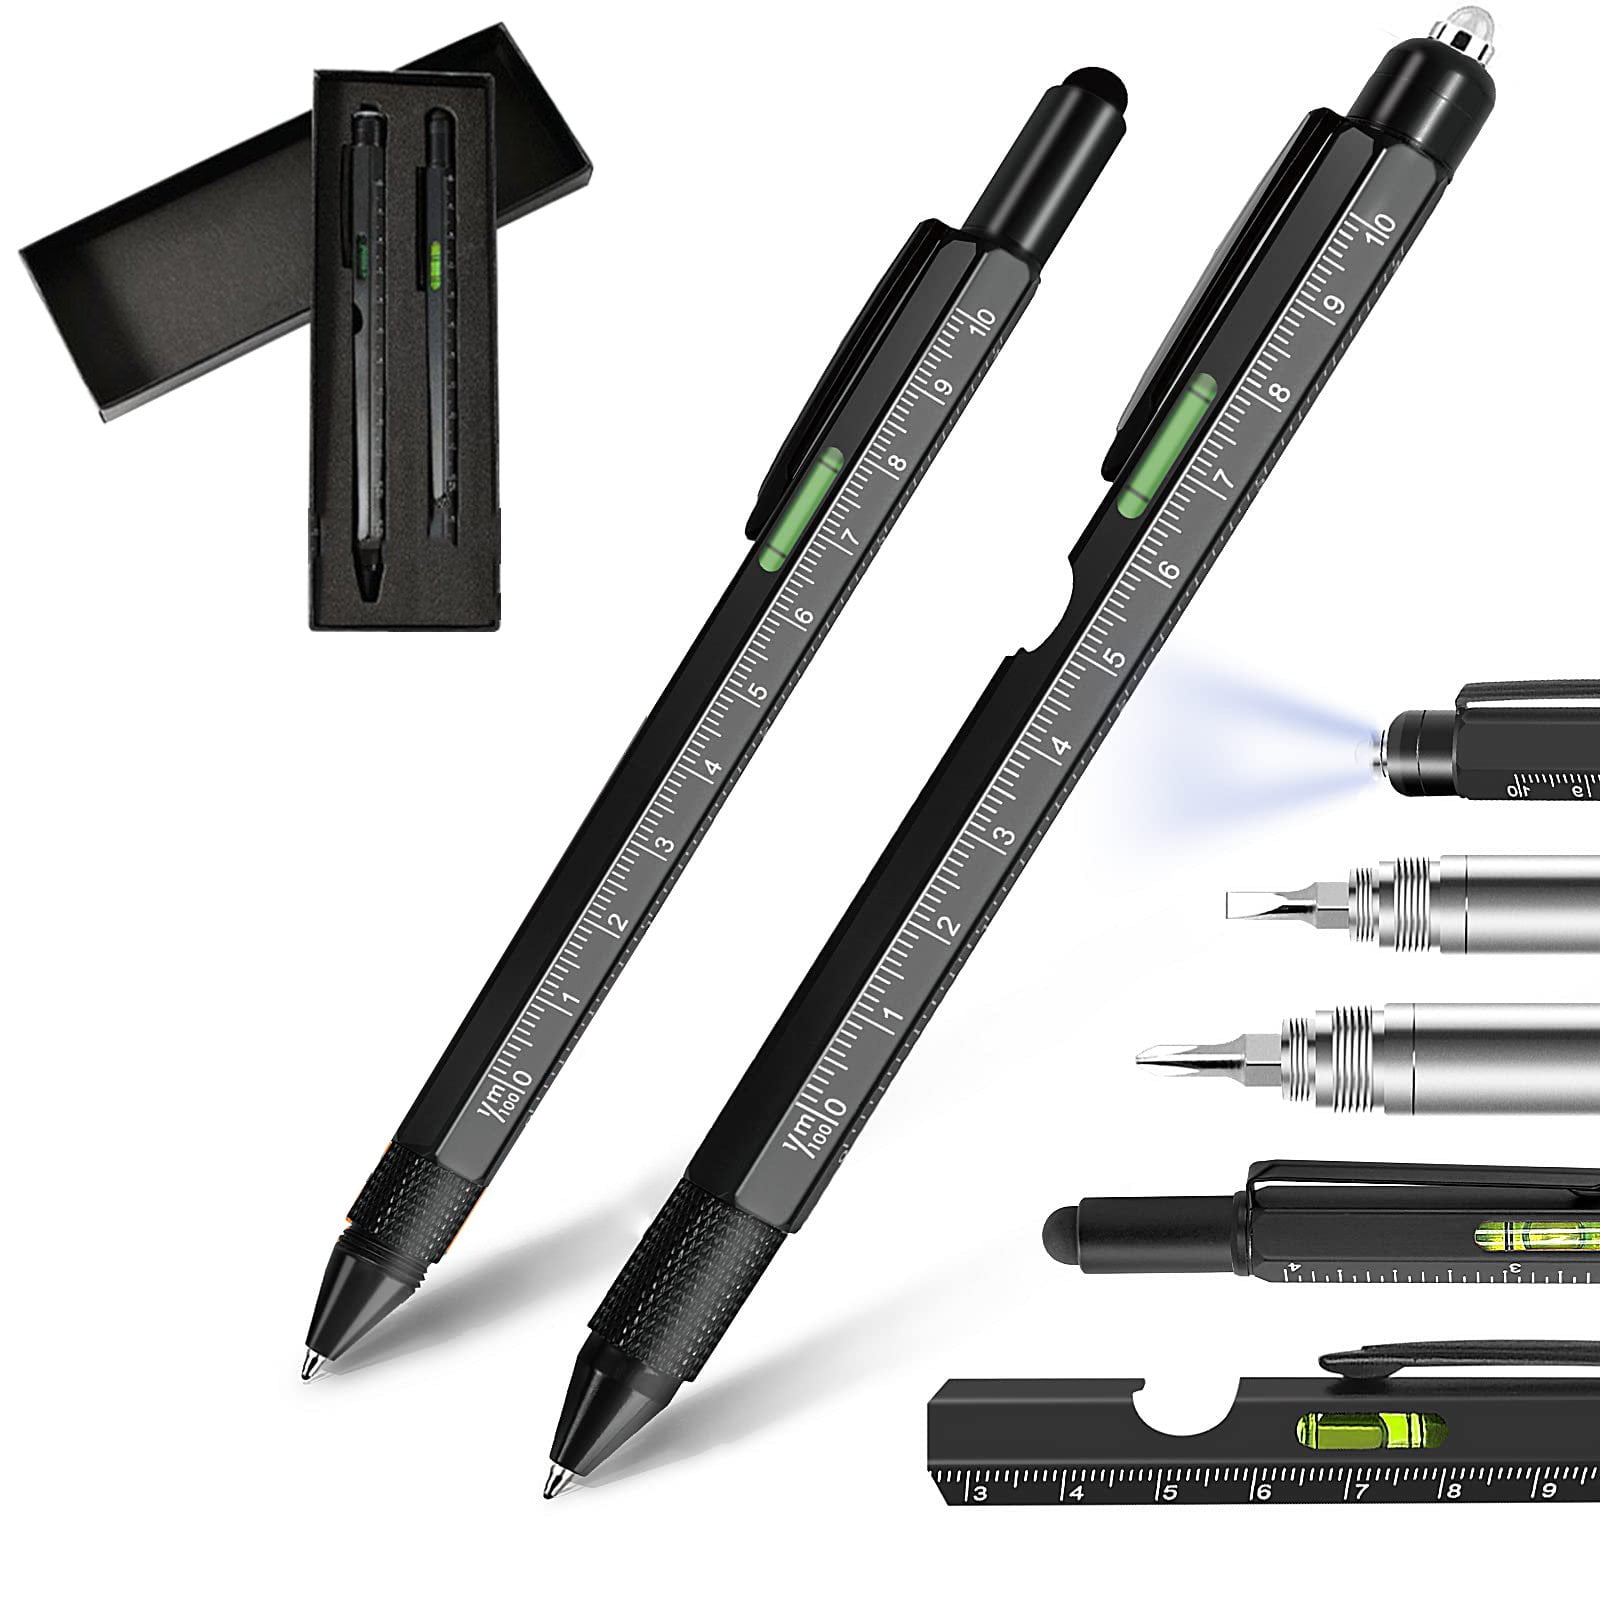 VEITORLD Multi-tool Pen Set 10 in 1, Christmas Ideas Gifts for Dad Men  Husband, Stocking Stuffers for Men, Ballpoint Pen Birthday Gifts for Father  Grandpa Boyfriend, Anniversary Unique Gifts for Him 